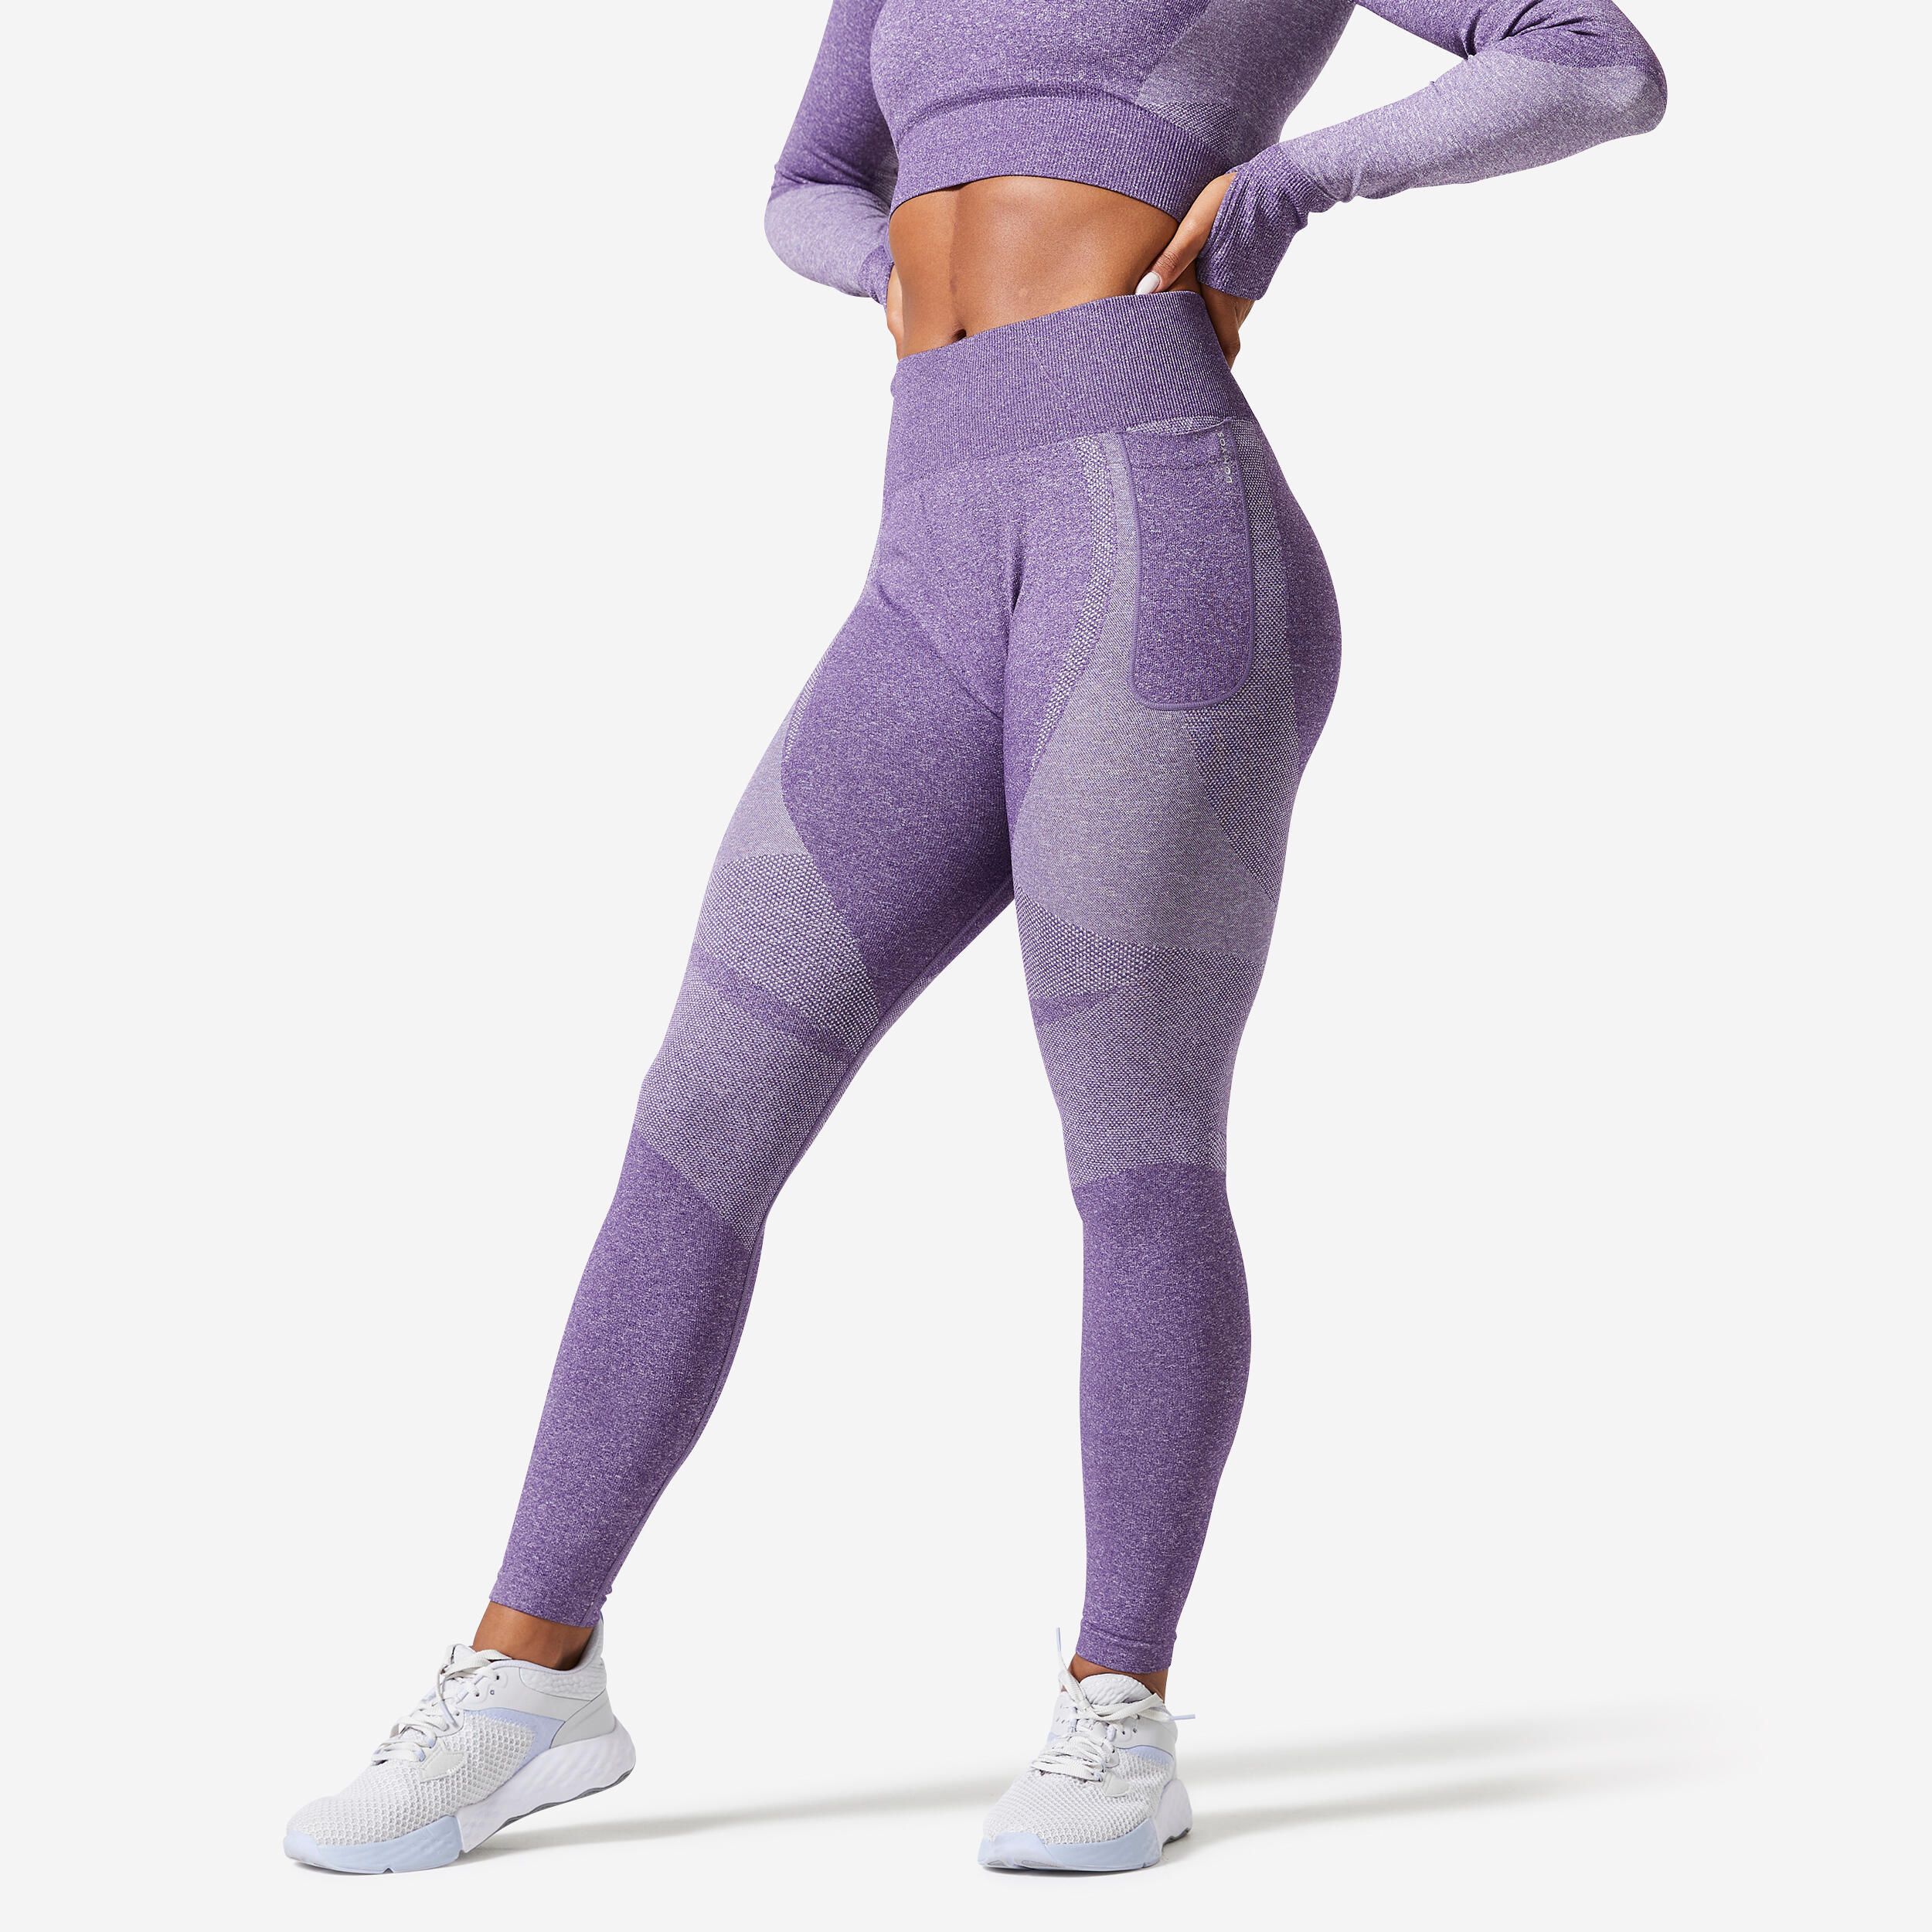 Stretchy High-Waisted Cotton Fitness Leggings with Mesh - Purple